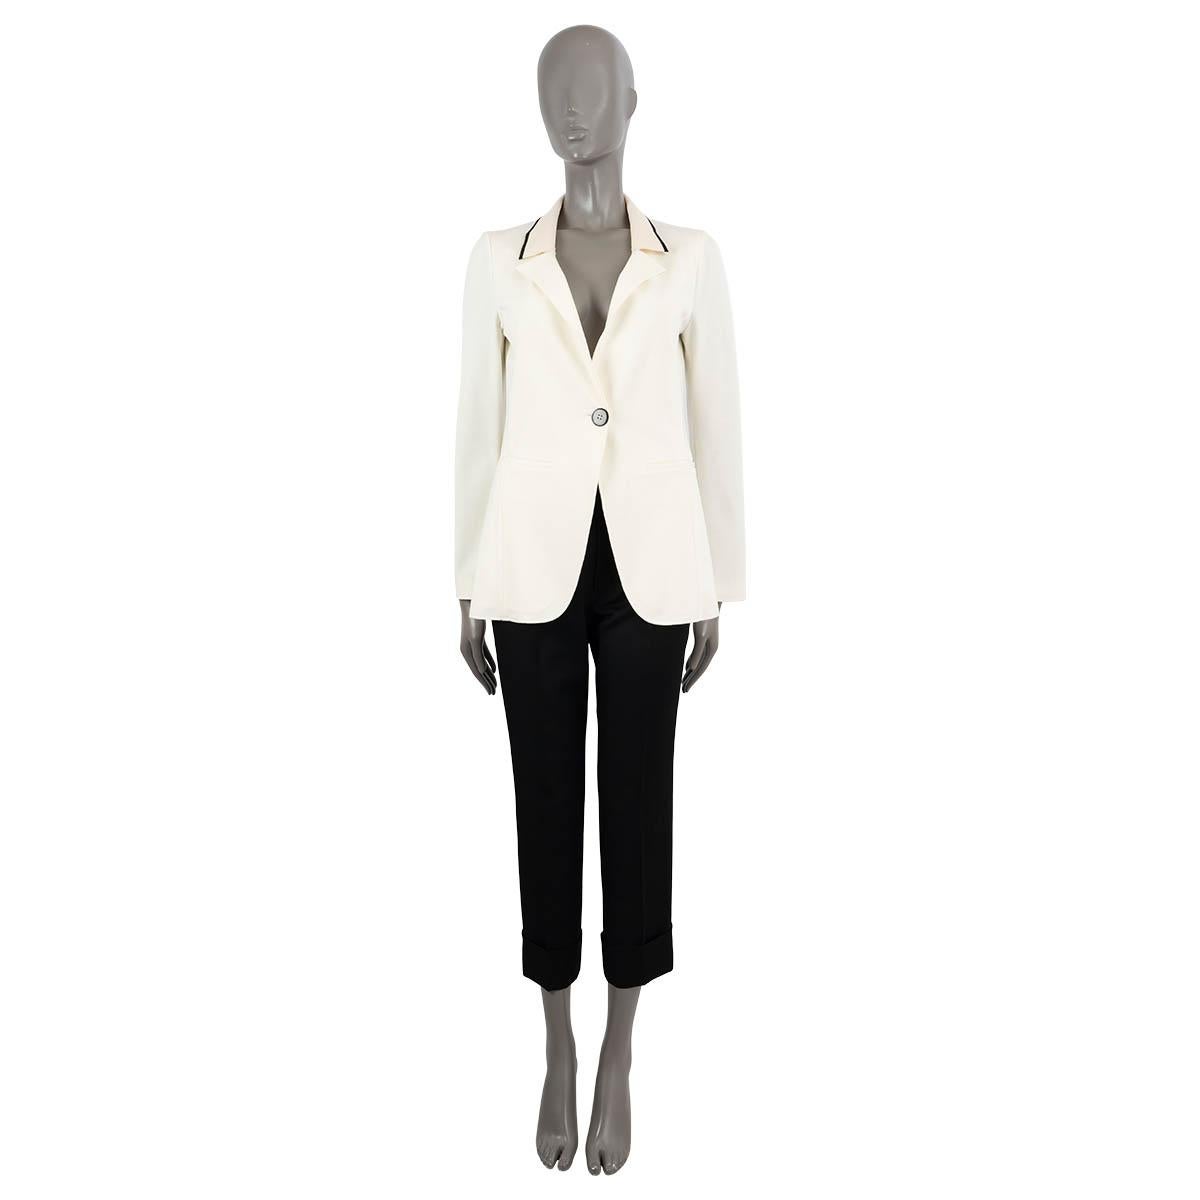 100% authentic Giorgio Armani fitted one-button blazer jacket in off-white jersey (viscose (71%), nylon (24%) and elastane (5%) - please note the content tag is missing). Features two front slit-pockets and a knit collar in cream with black stripe.